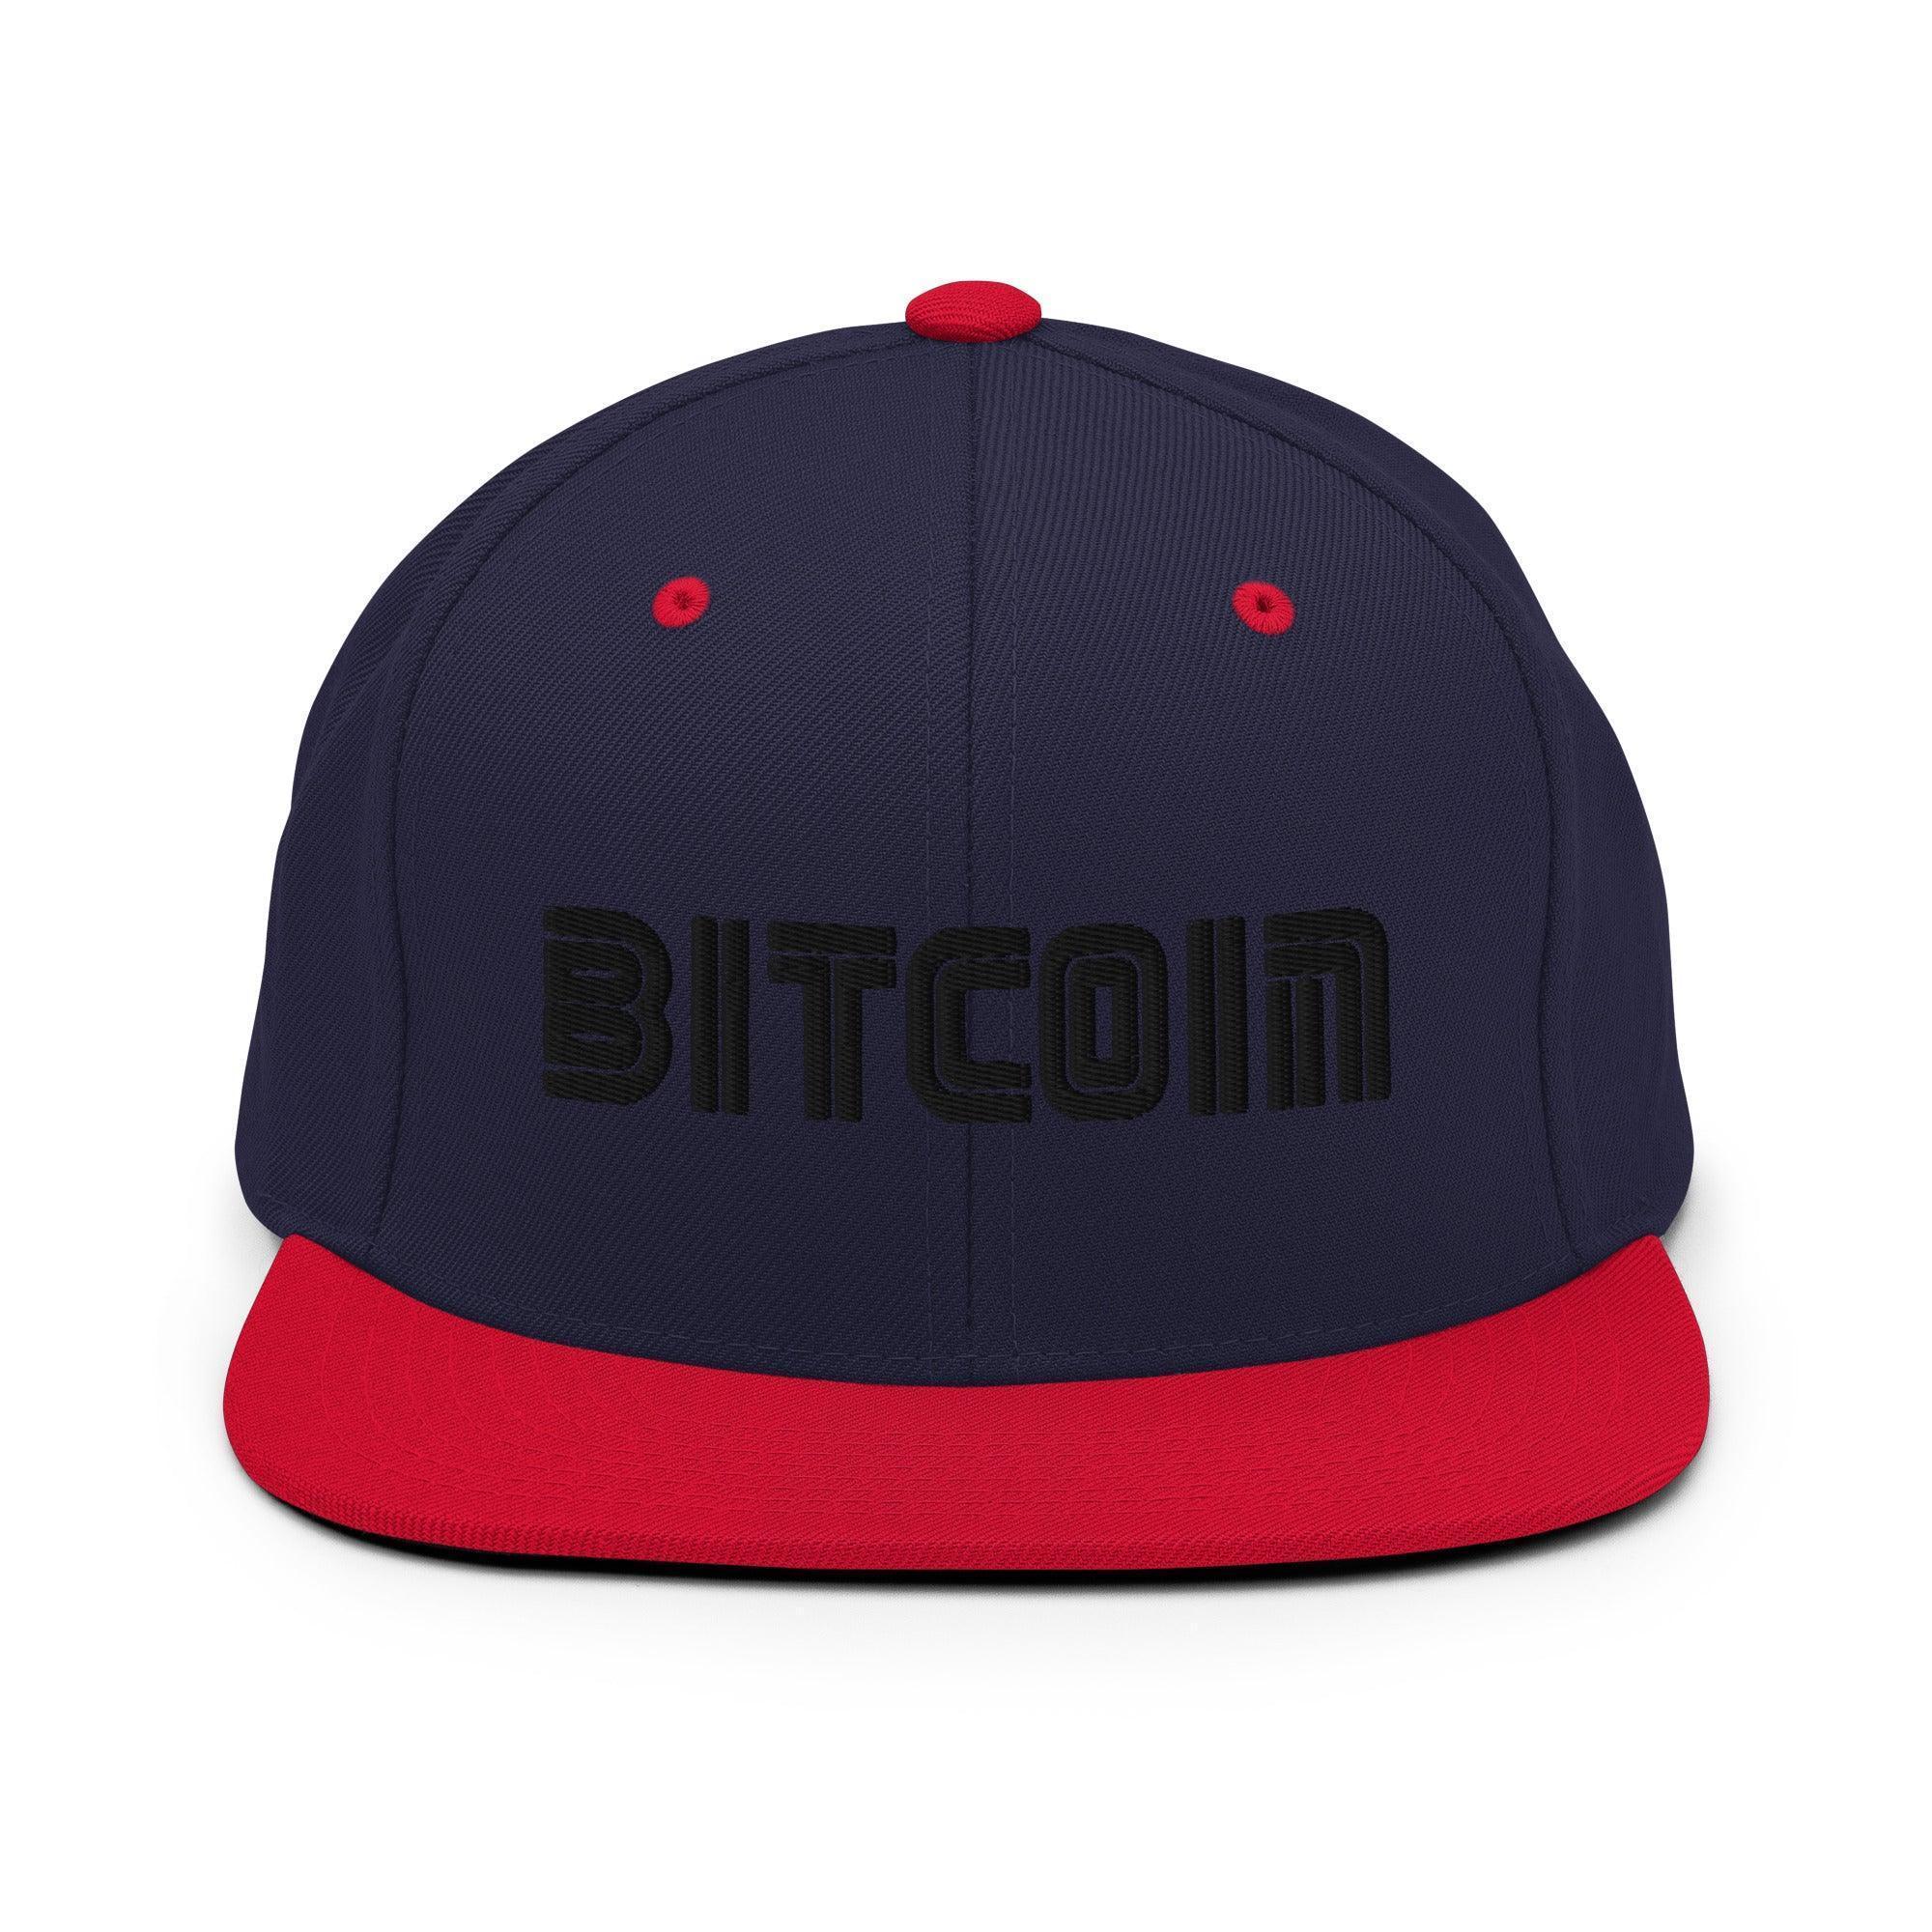 Bitcoin Cyptocurrency Snapback Hat - InvestmenTees